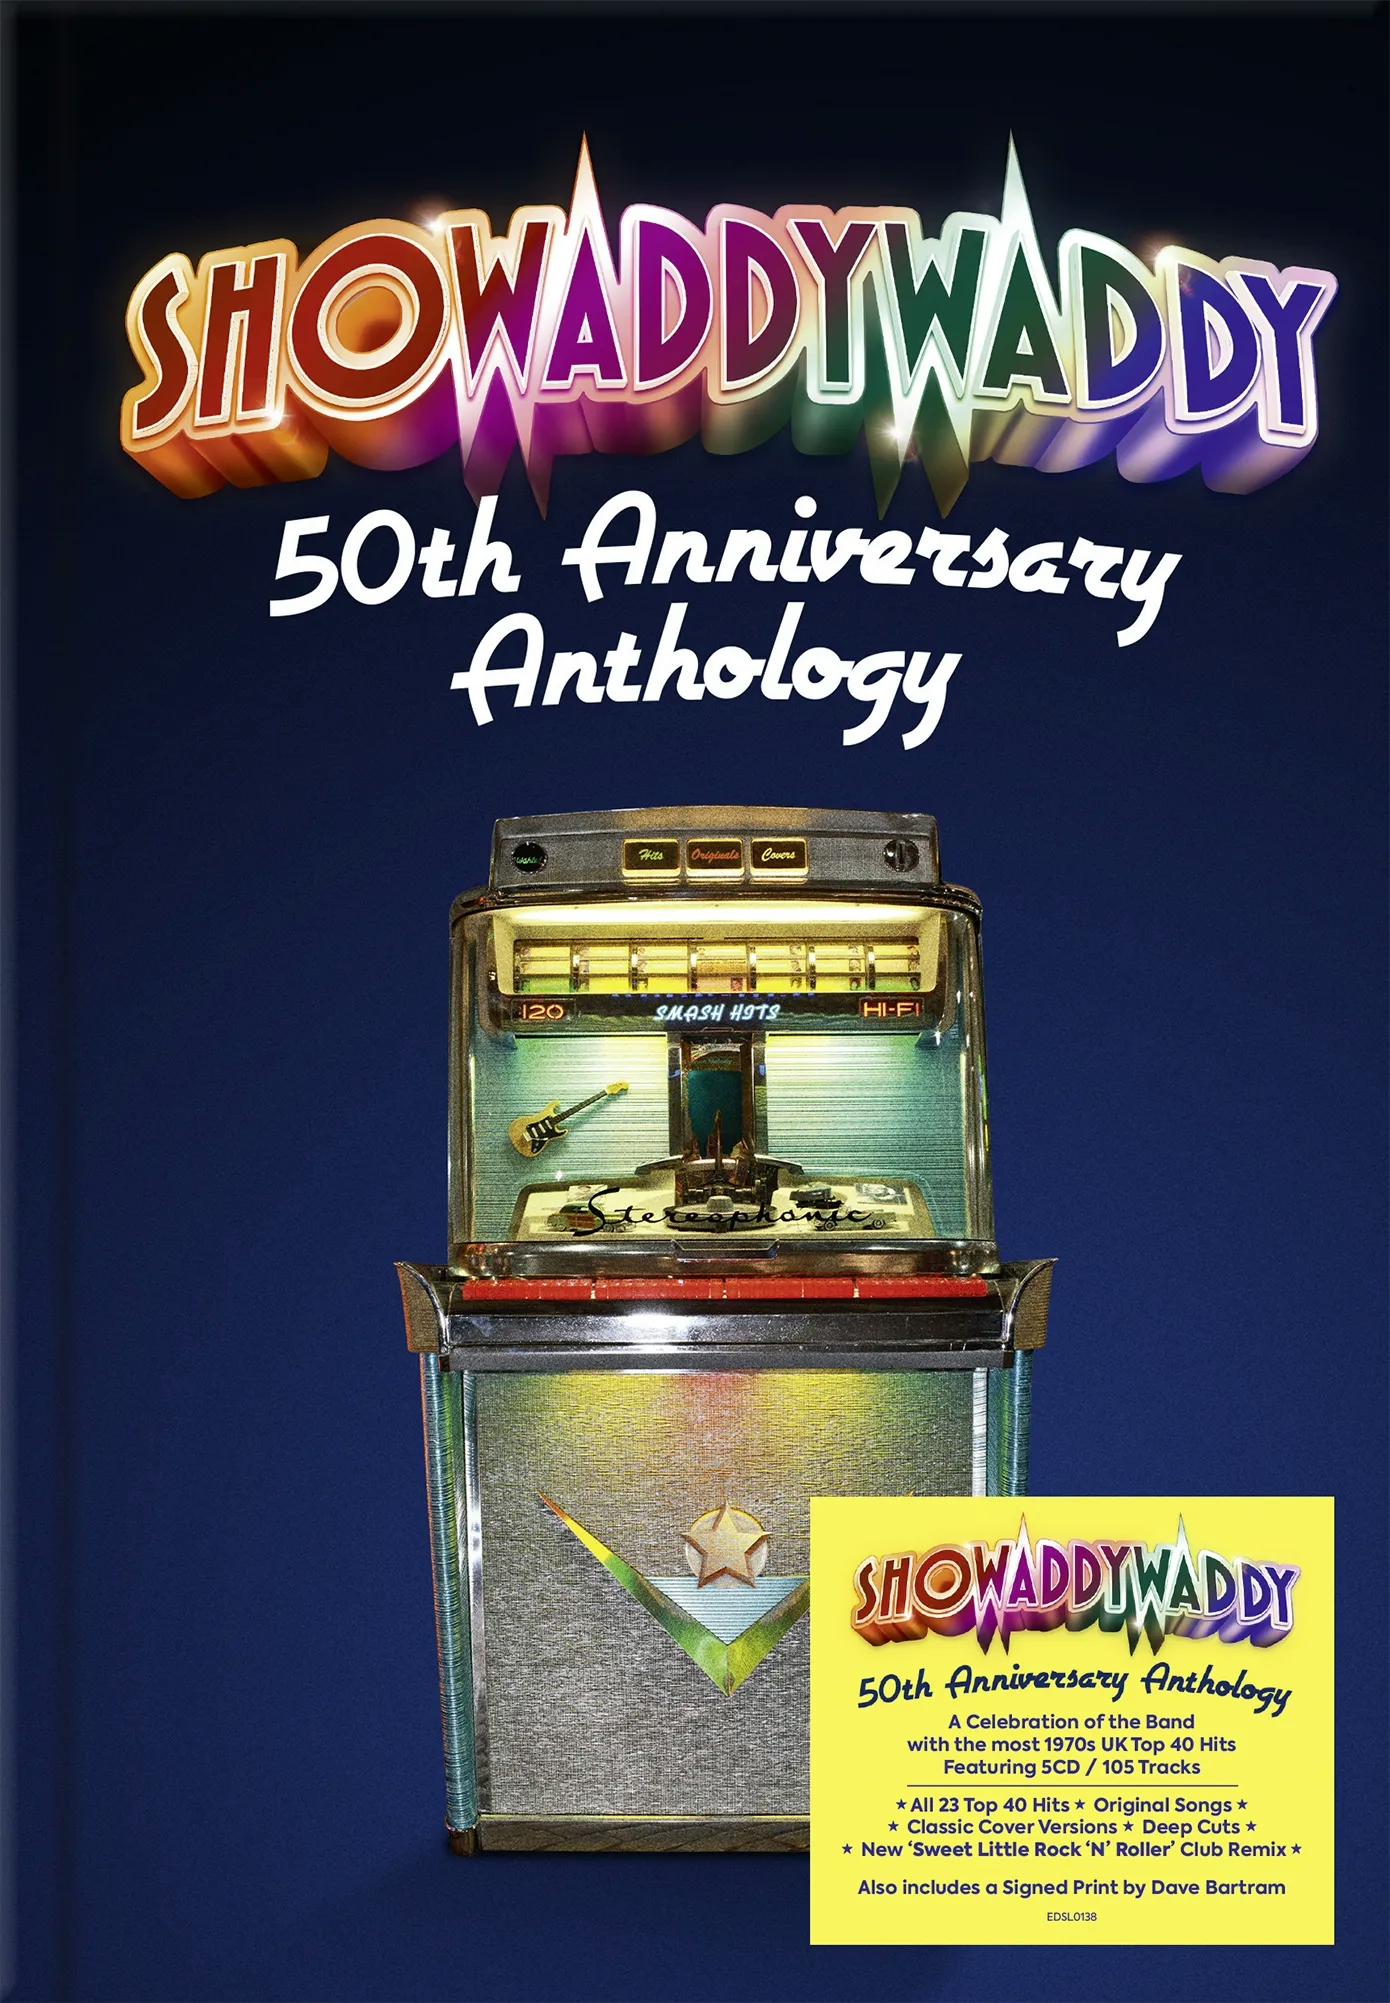 Album artwork for 50th Anniversary Anthology by Showaddywaddy